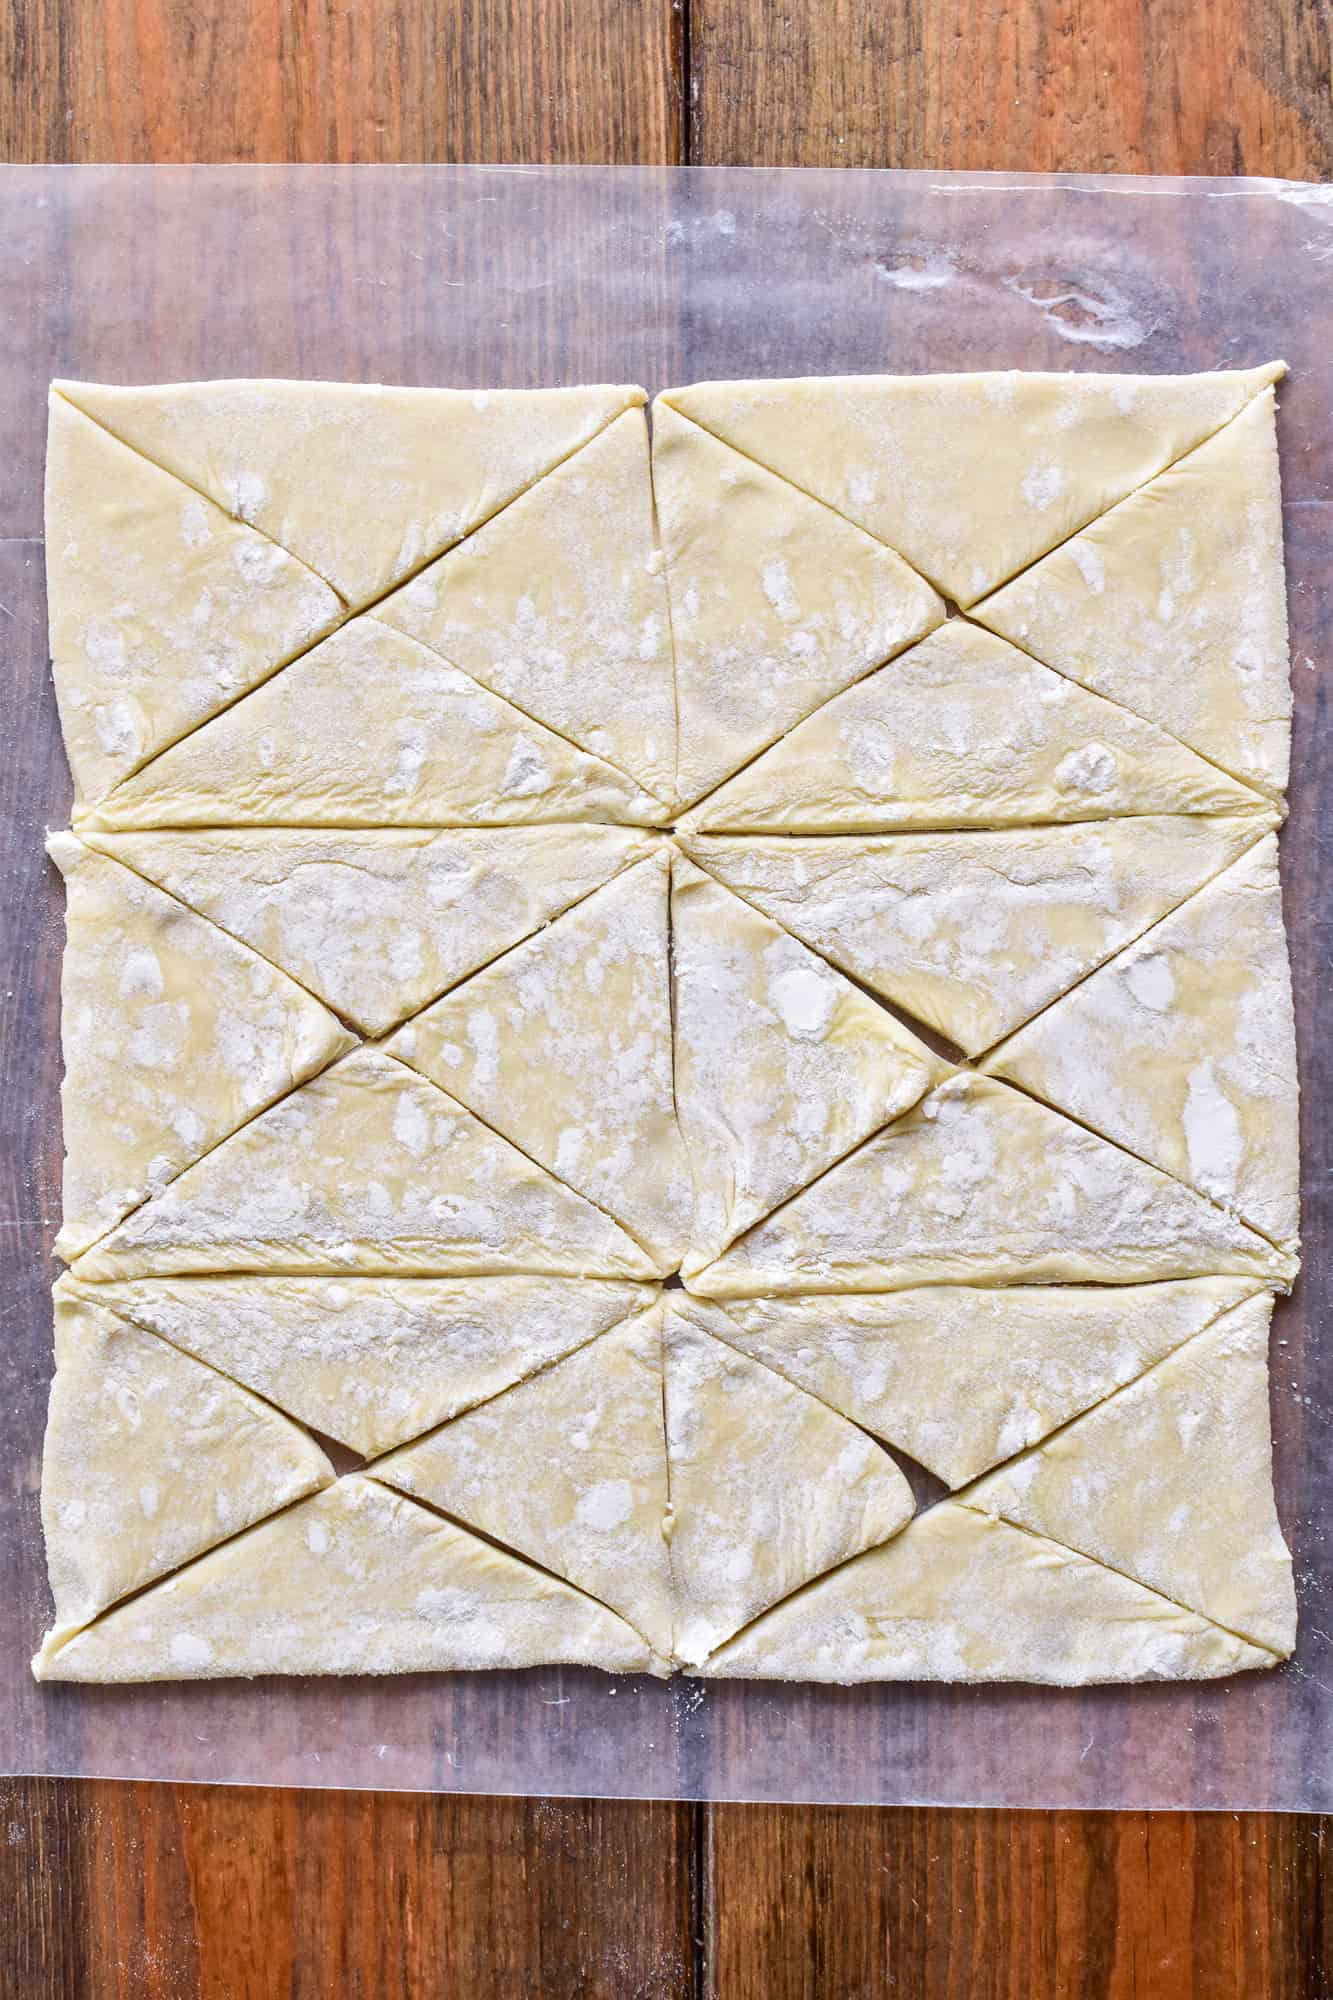 Puff Pastry cut into triangles for Pigs in a Blanket